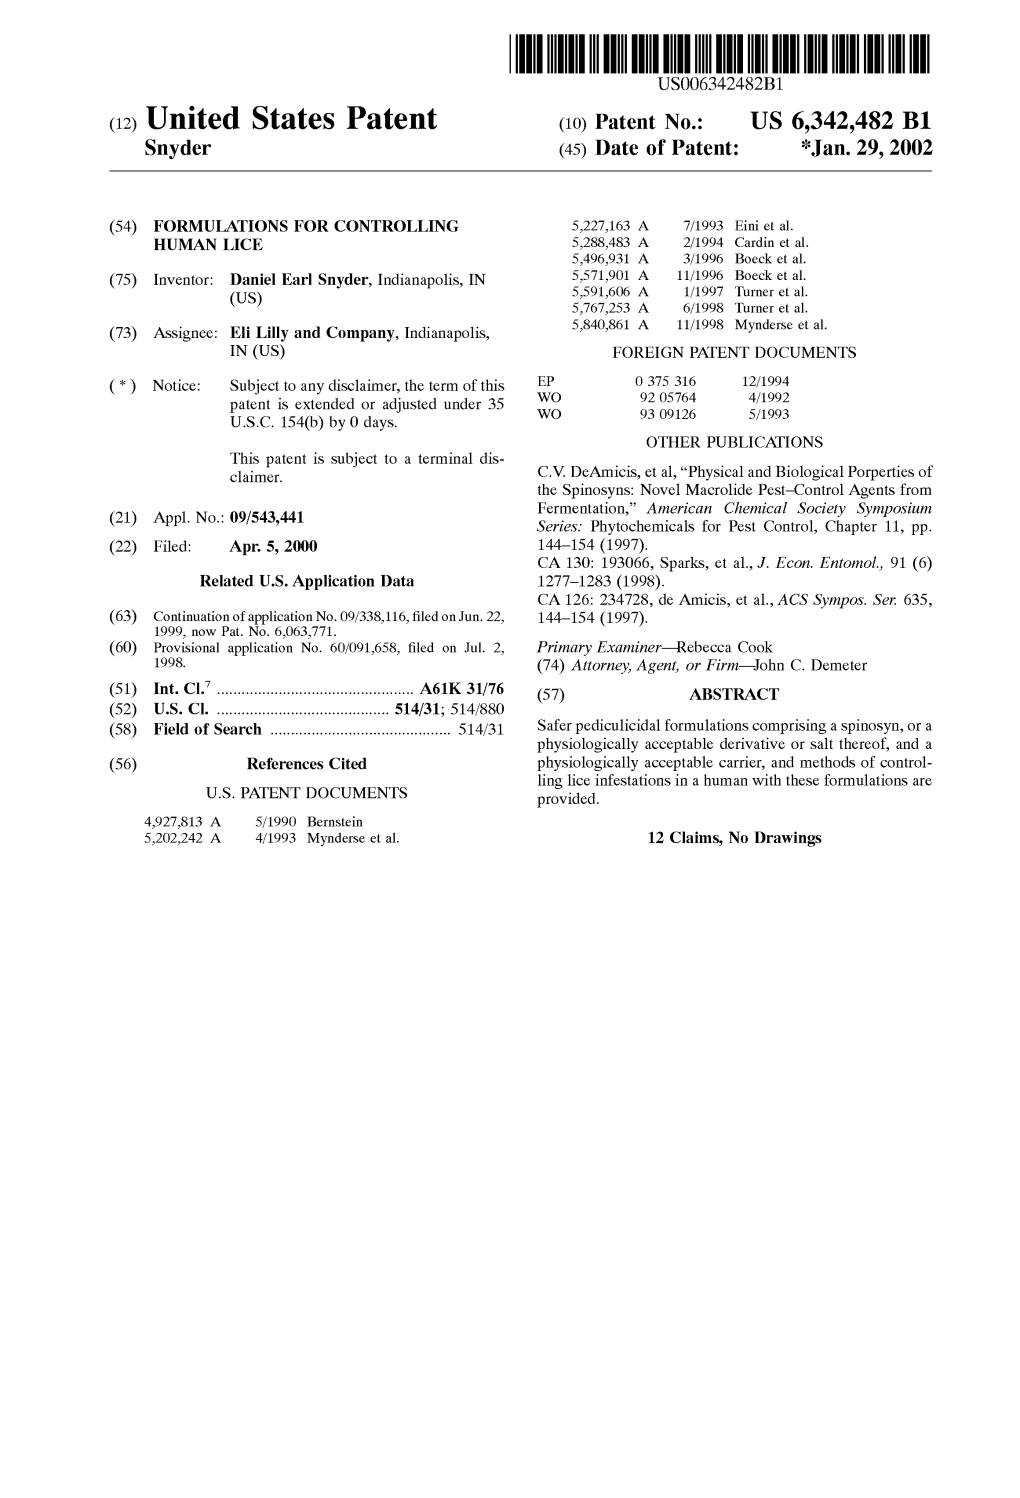 (12) United States Patent (10) Patent No.: US 6,342,482 B1 Snyder (45) Date of Patent: *Jan